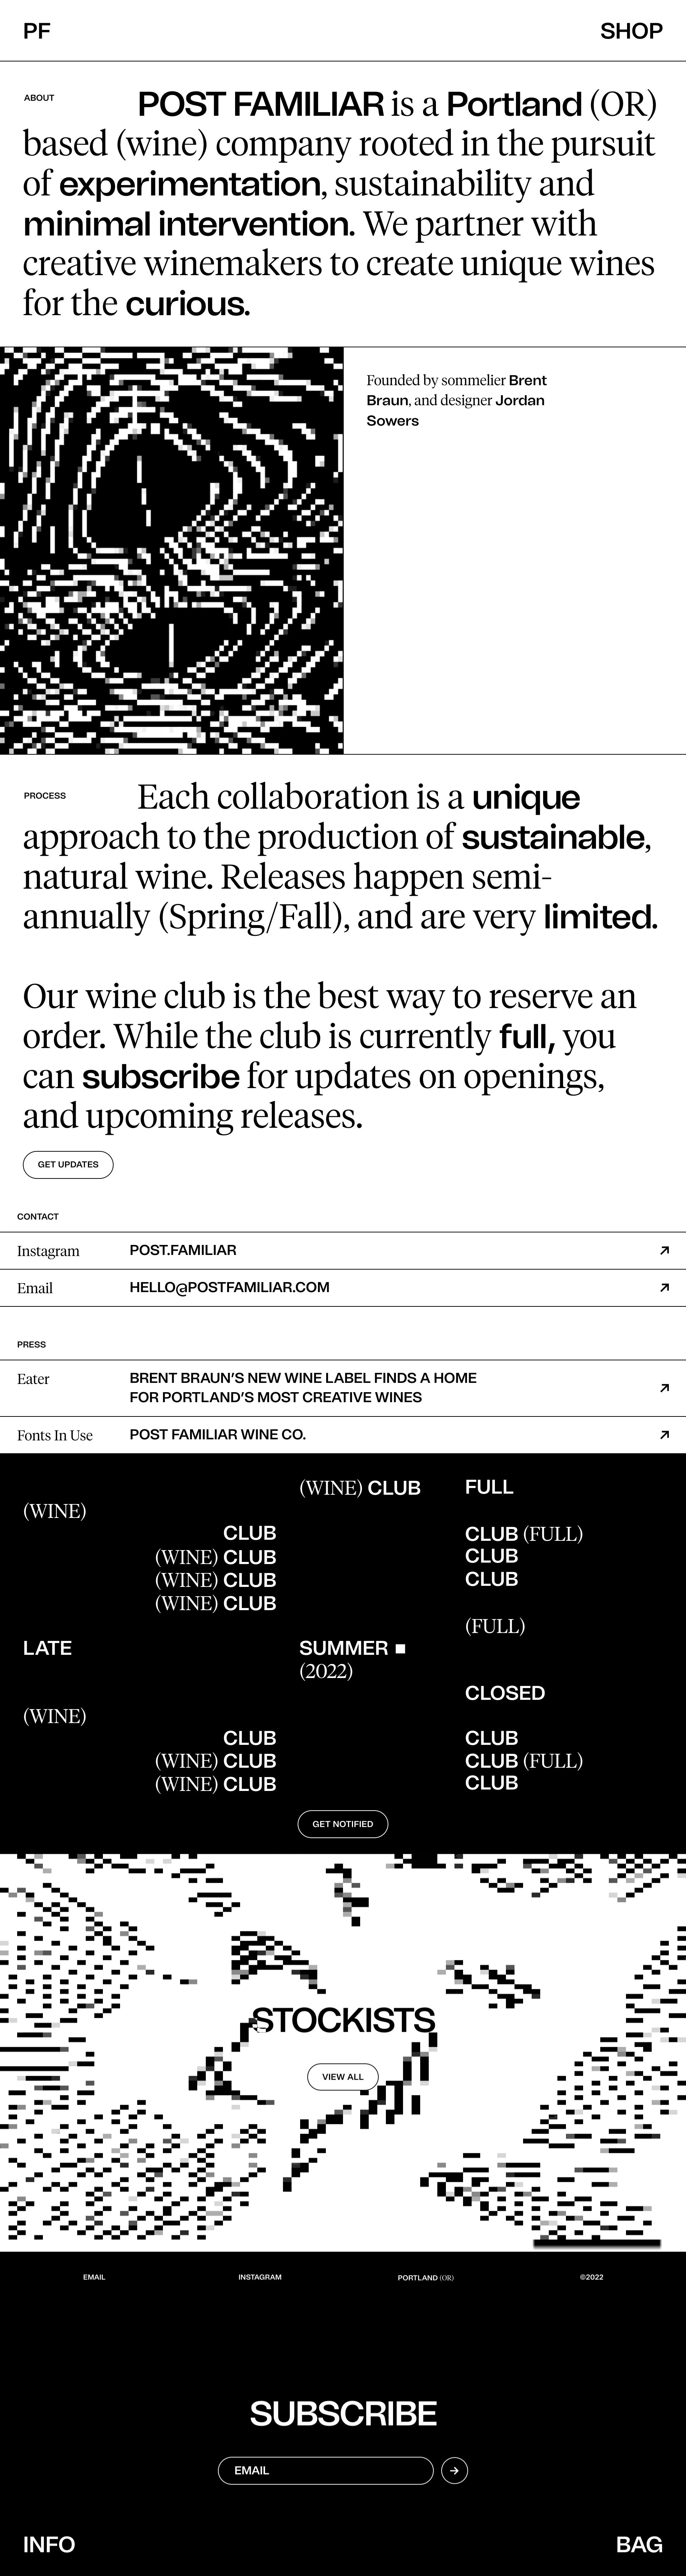 Post Familiar Wine Landing Page Example: A Portland, Oregon based wine company rooted in the pursuit of experimentation, sustainability and minimal intervention. We partner with creative winemakers to produce unique wines for the curious.